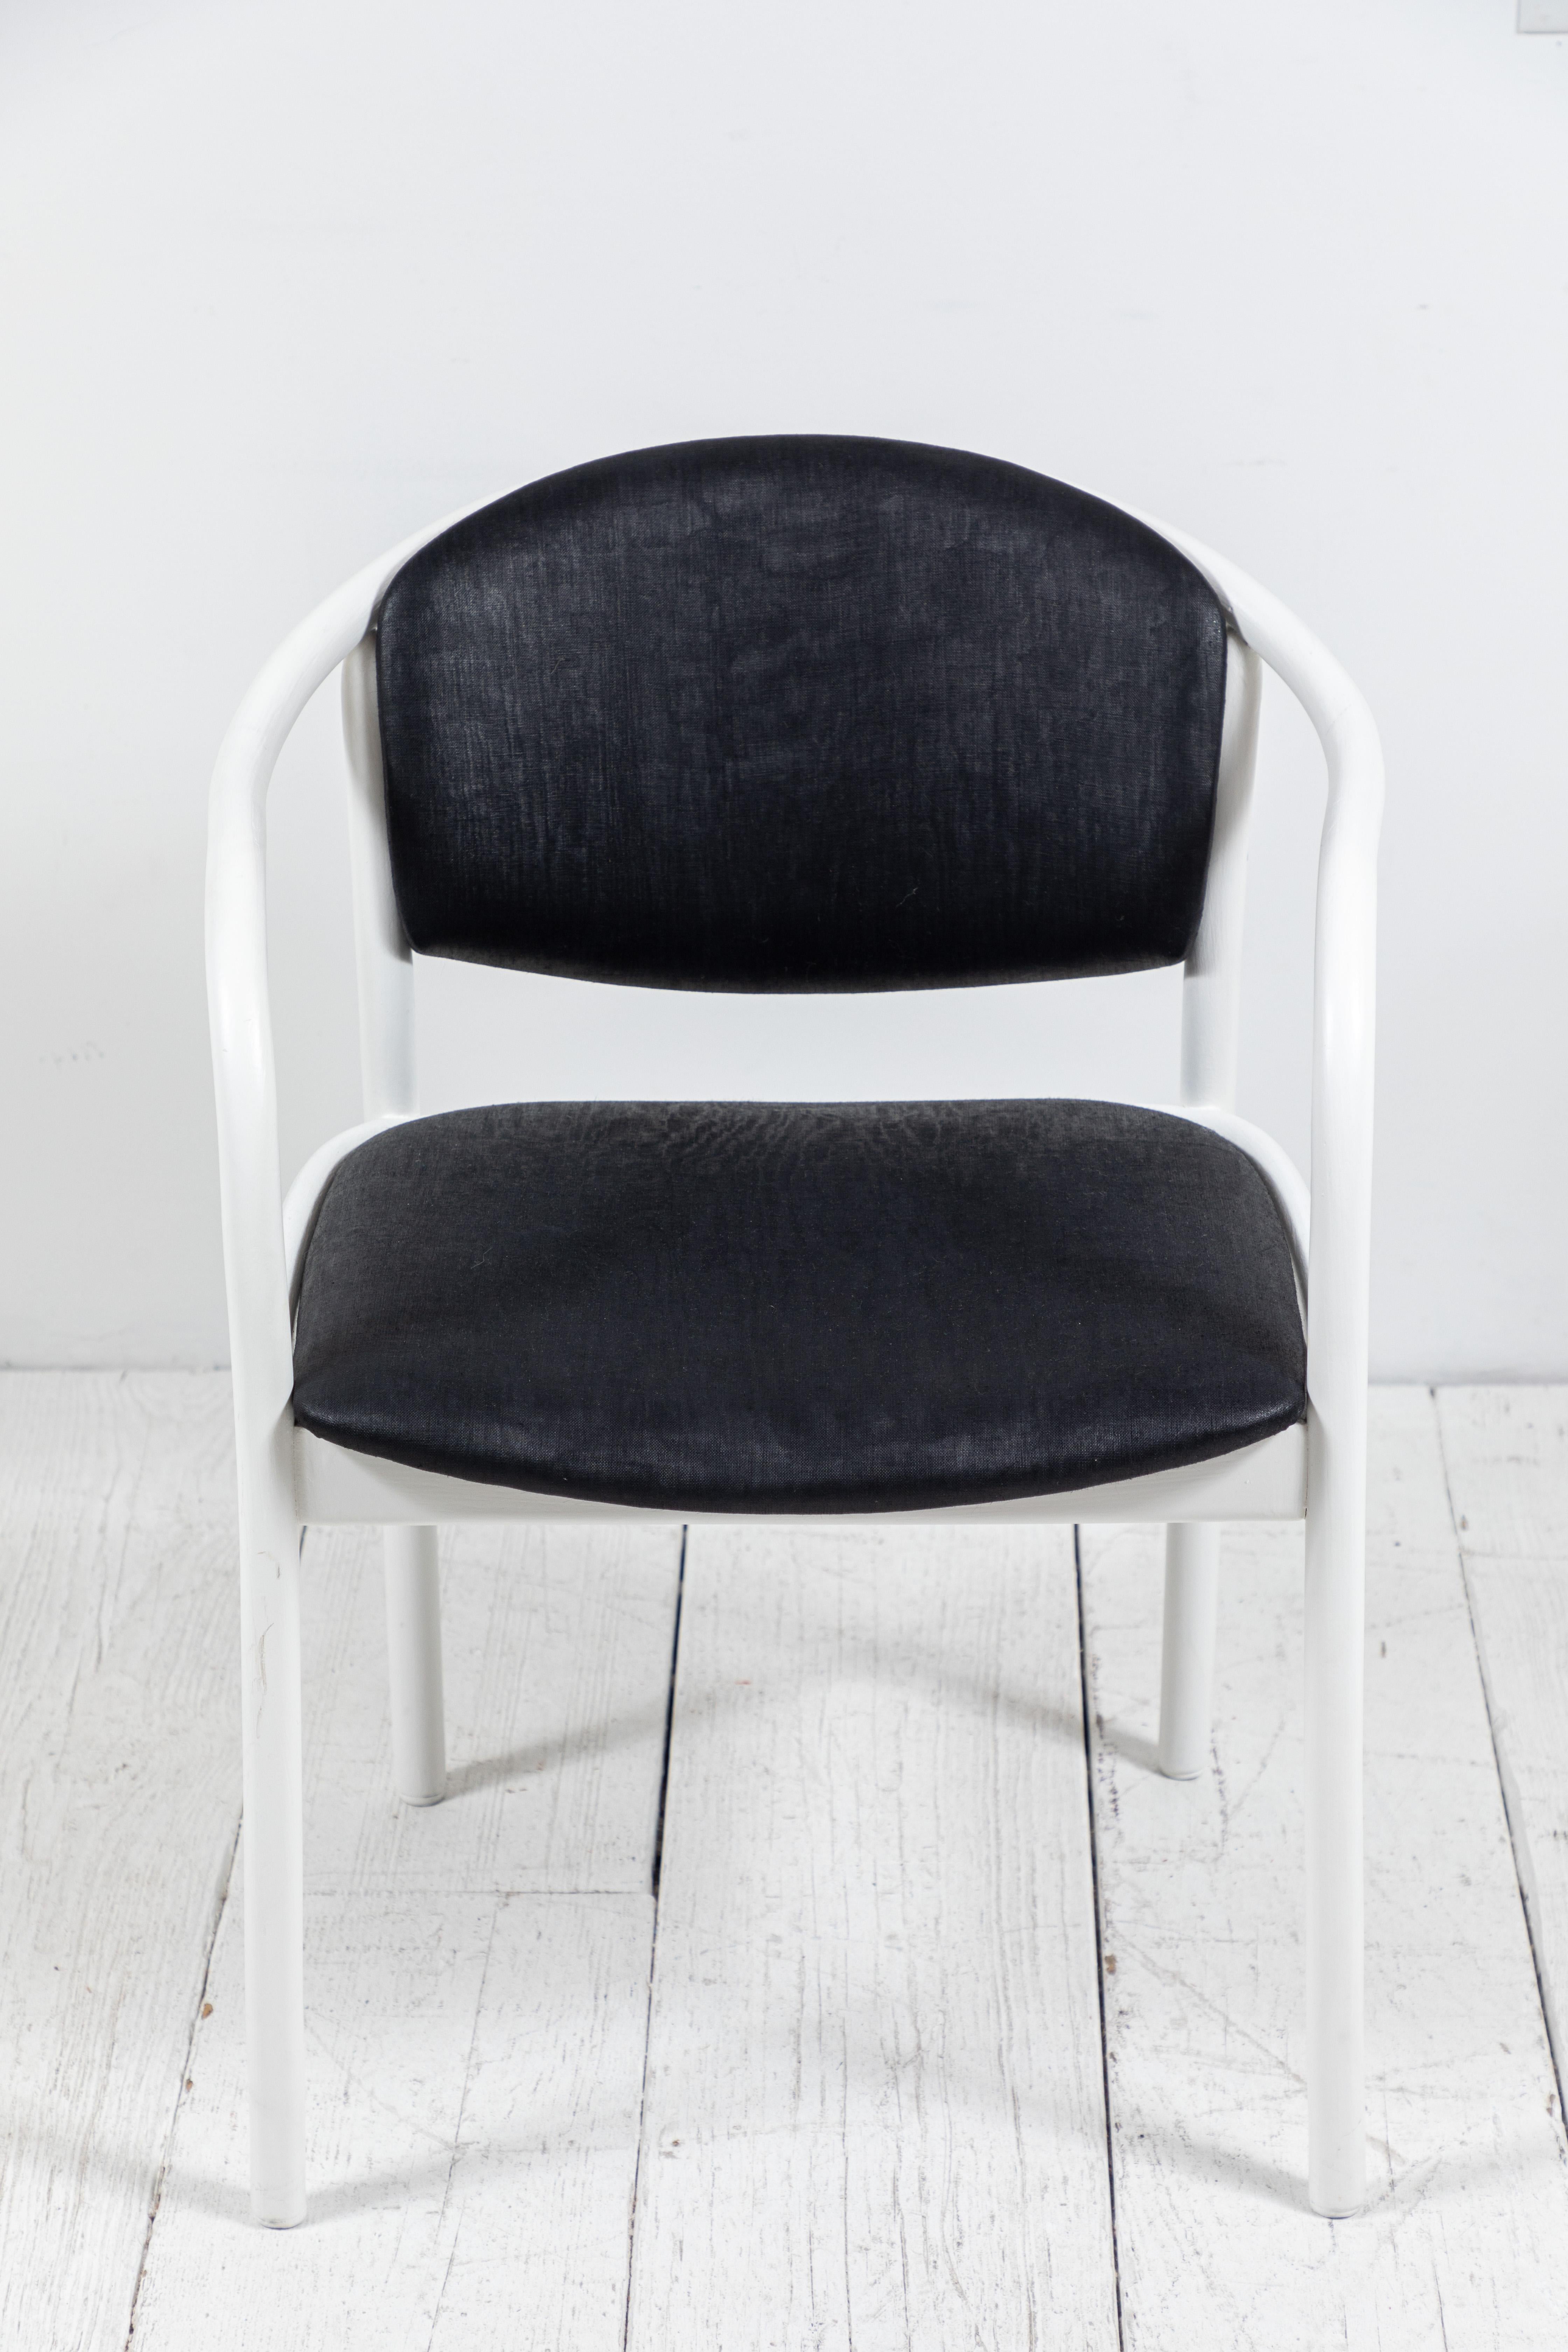 Set of four Thonet dining chairs newly painted white and upholstered in a black beetled linen from British fabric company, 36 Bourne Street.